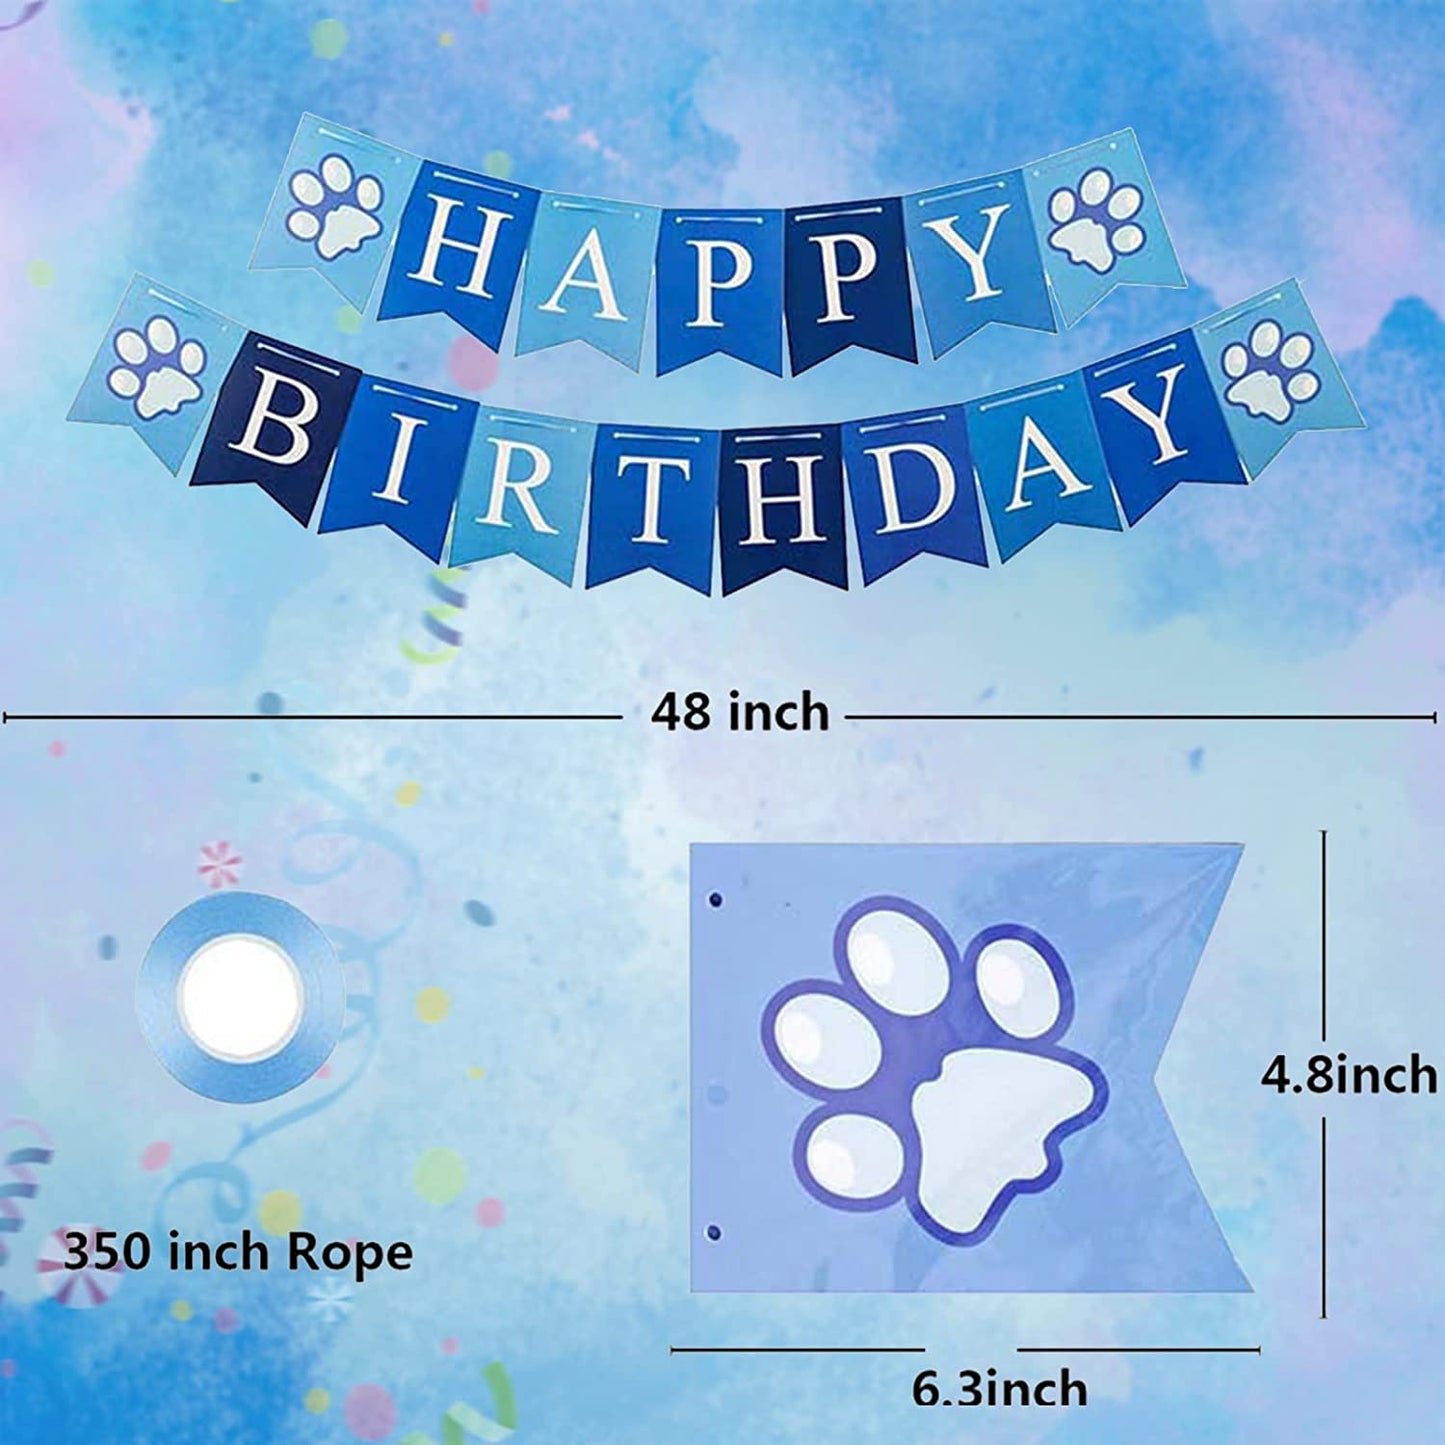 Dog Birthday Party Supplies, Dog Birthday Party Decoration Set, Dog Cute Hat Triangle Scarf Bow Dog Head Banner and Cute Balloon, Used for Dog Birthday Party Decoration (Blue) Animals & Pet Supplies > Pet Supplies > Dog Supplies > Dog Apparel DYGYZH   